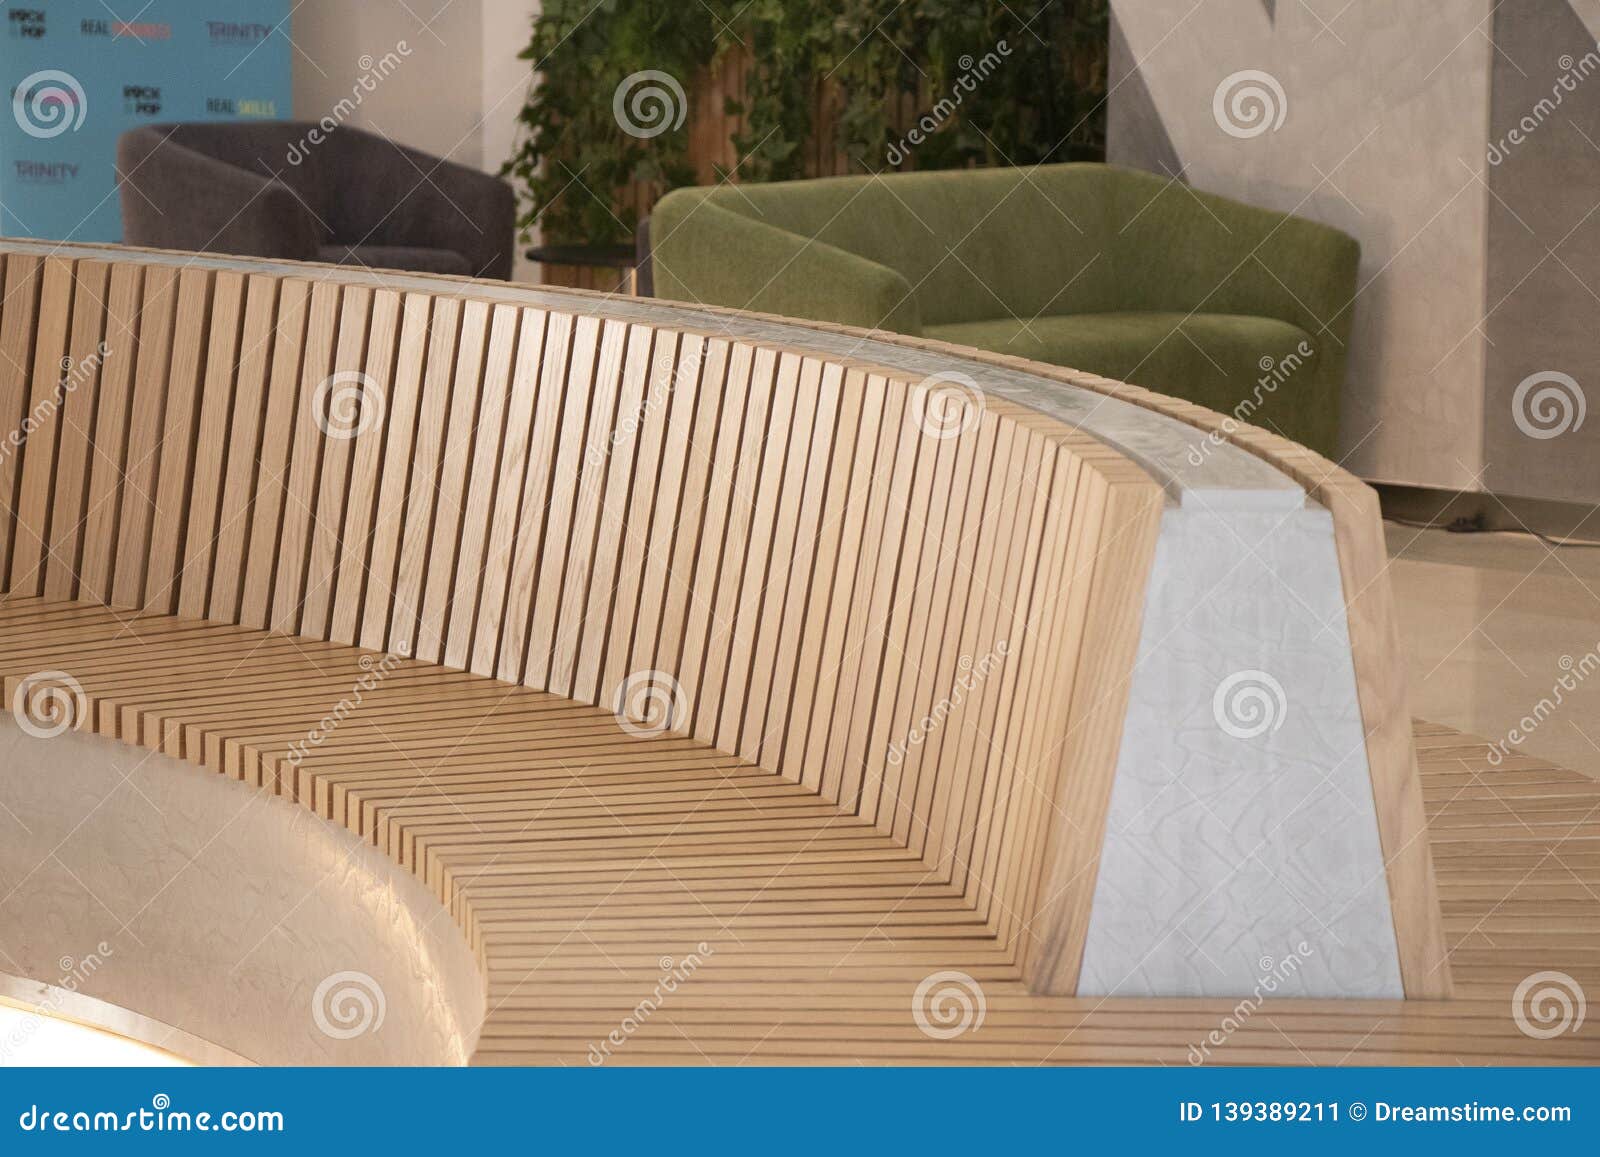 Modern Curved Shaped Brown Wooden Bench Indoor Stock Image Image Of Public